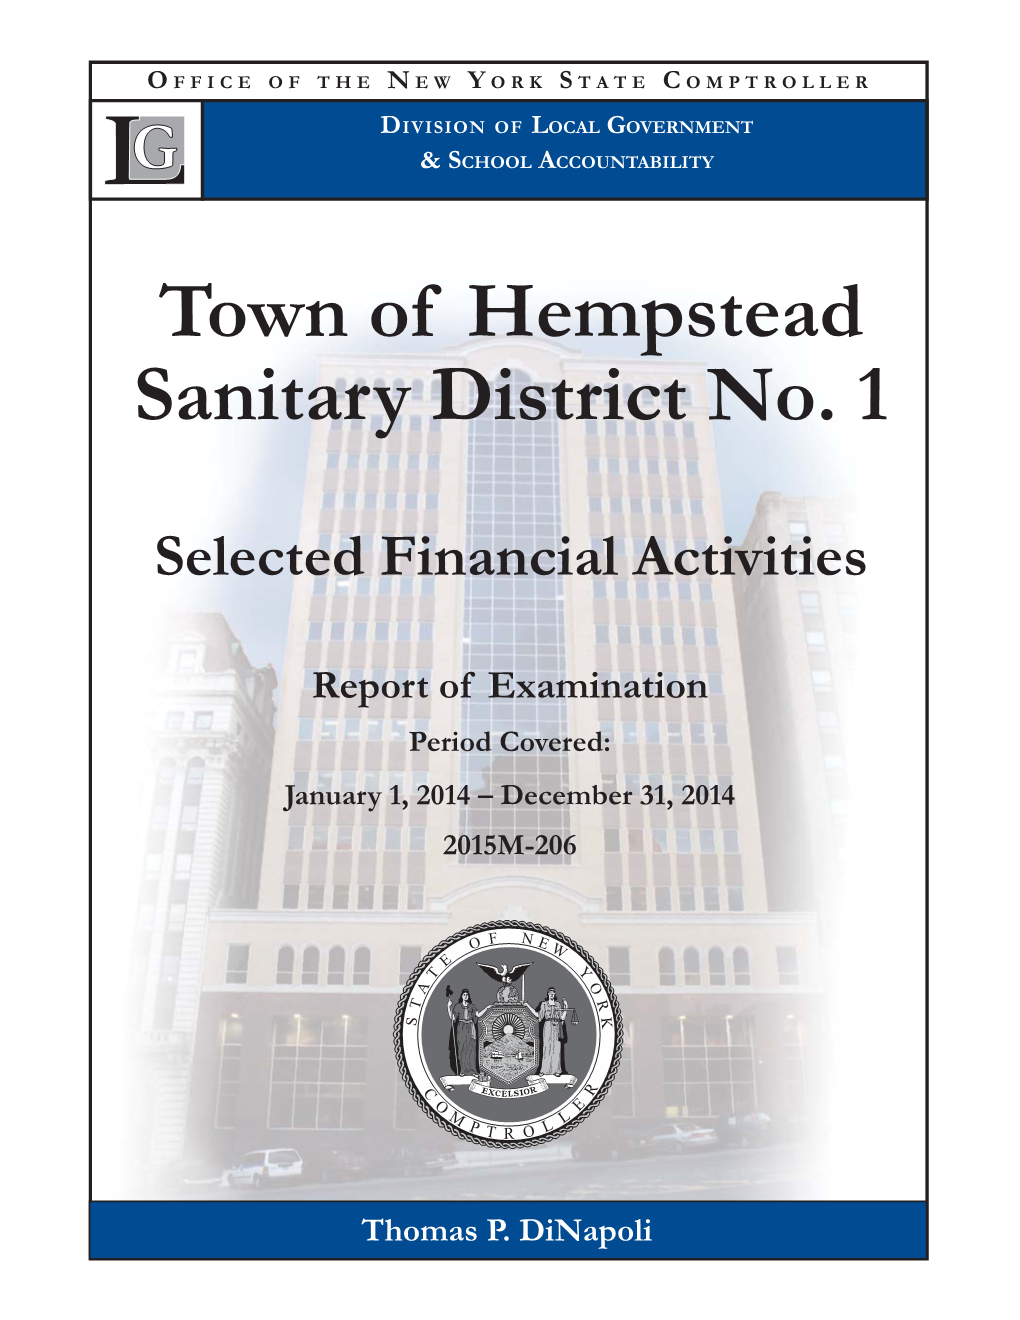 Town of Hempstead Sanitary District No. 1